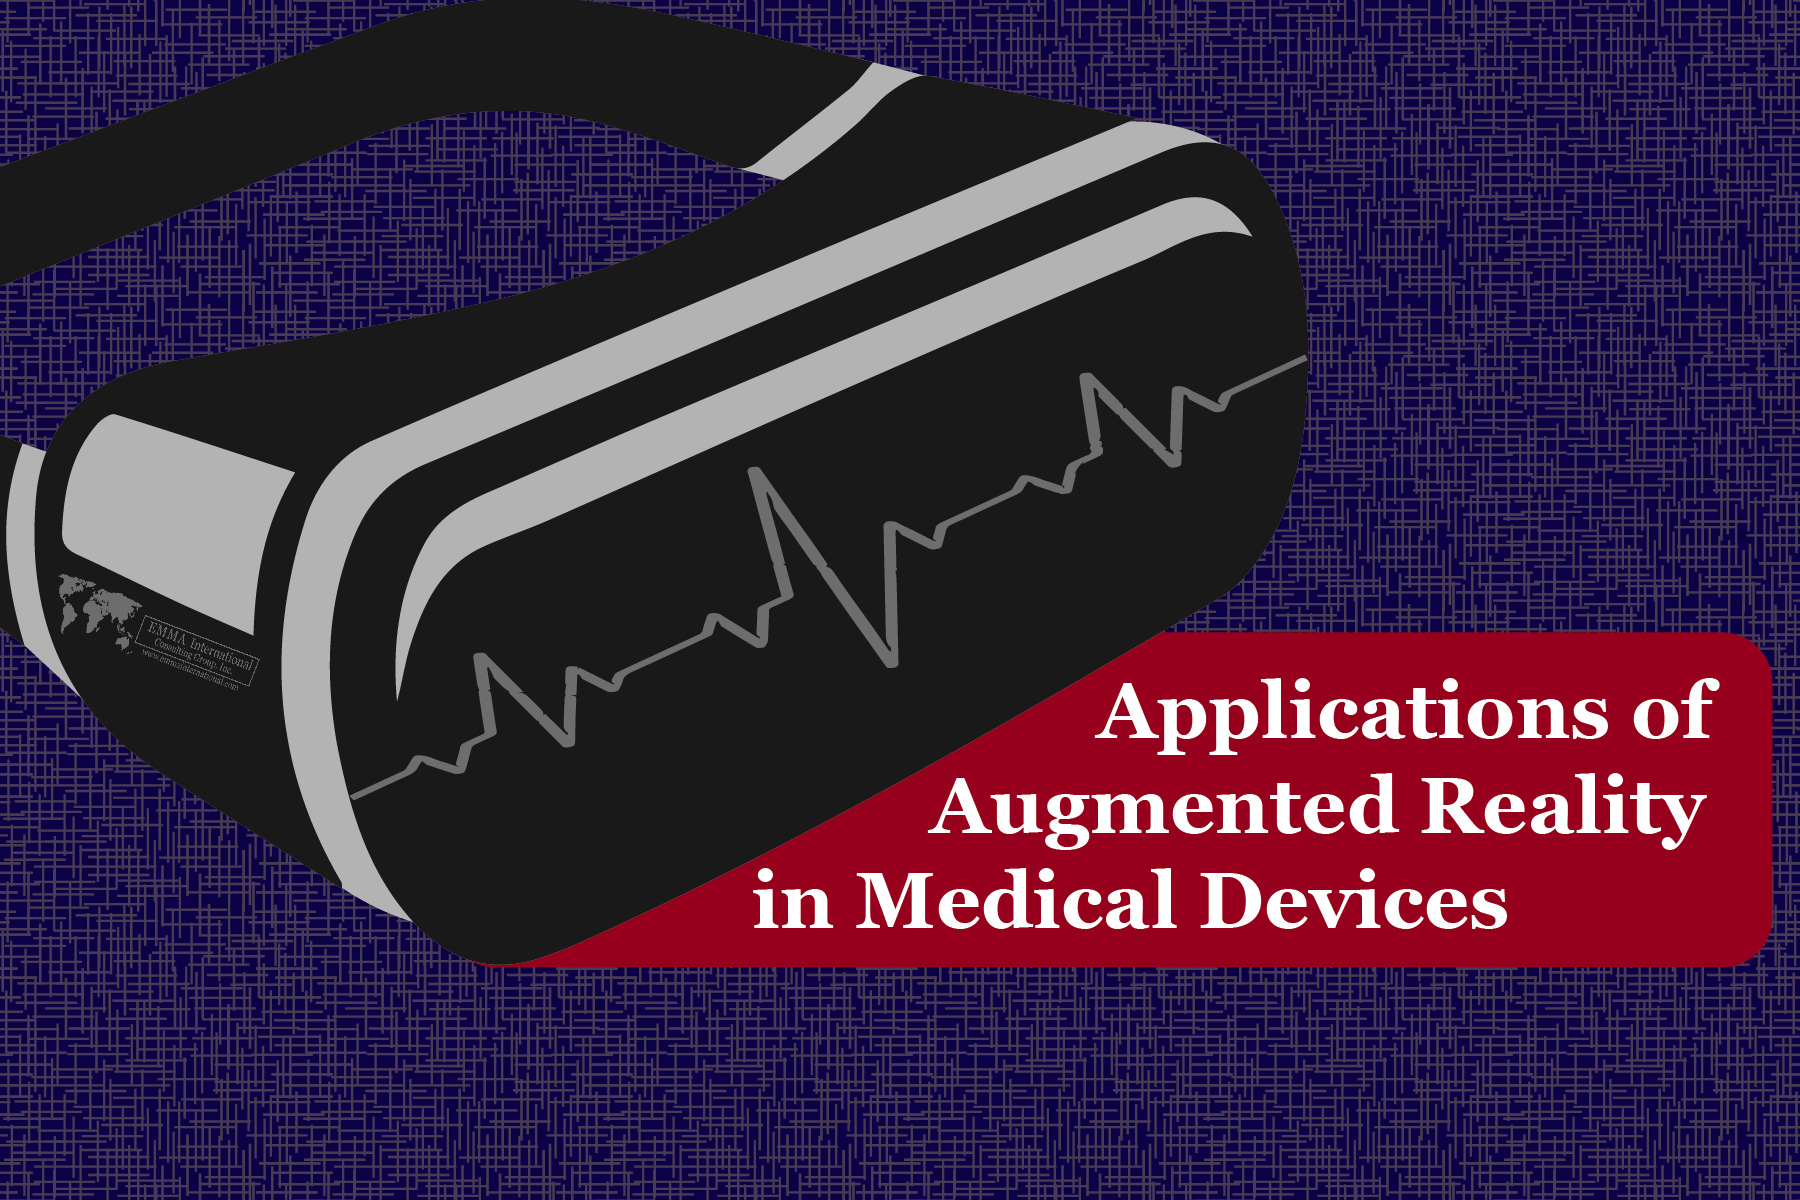 Applications of Augmented Reality in Medical Devices